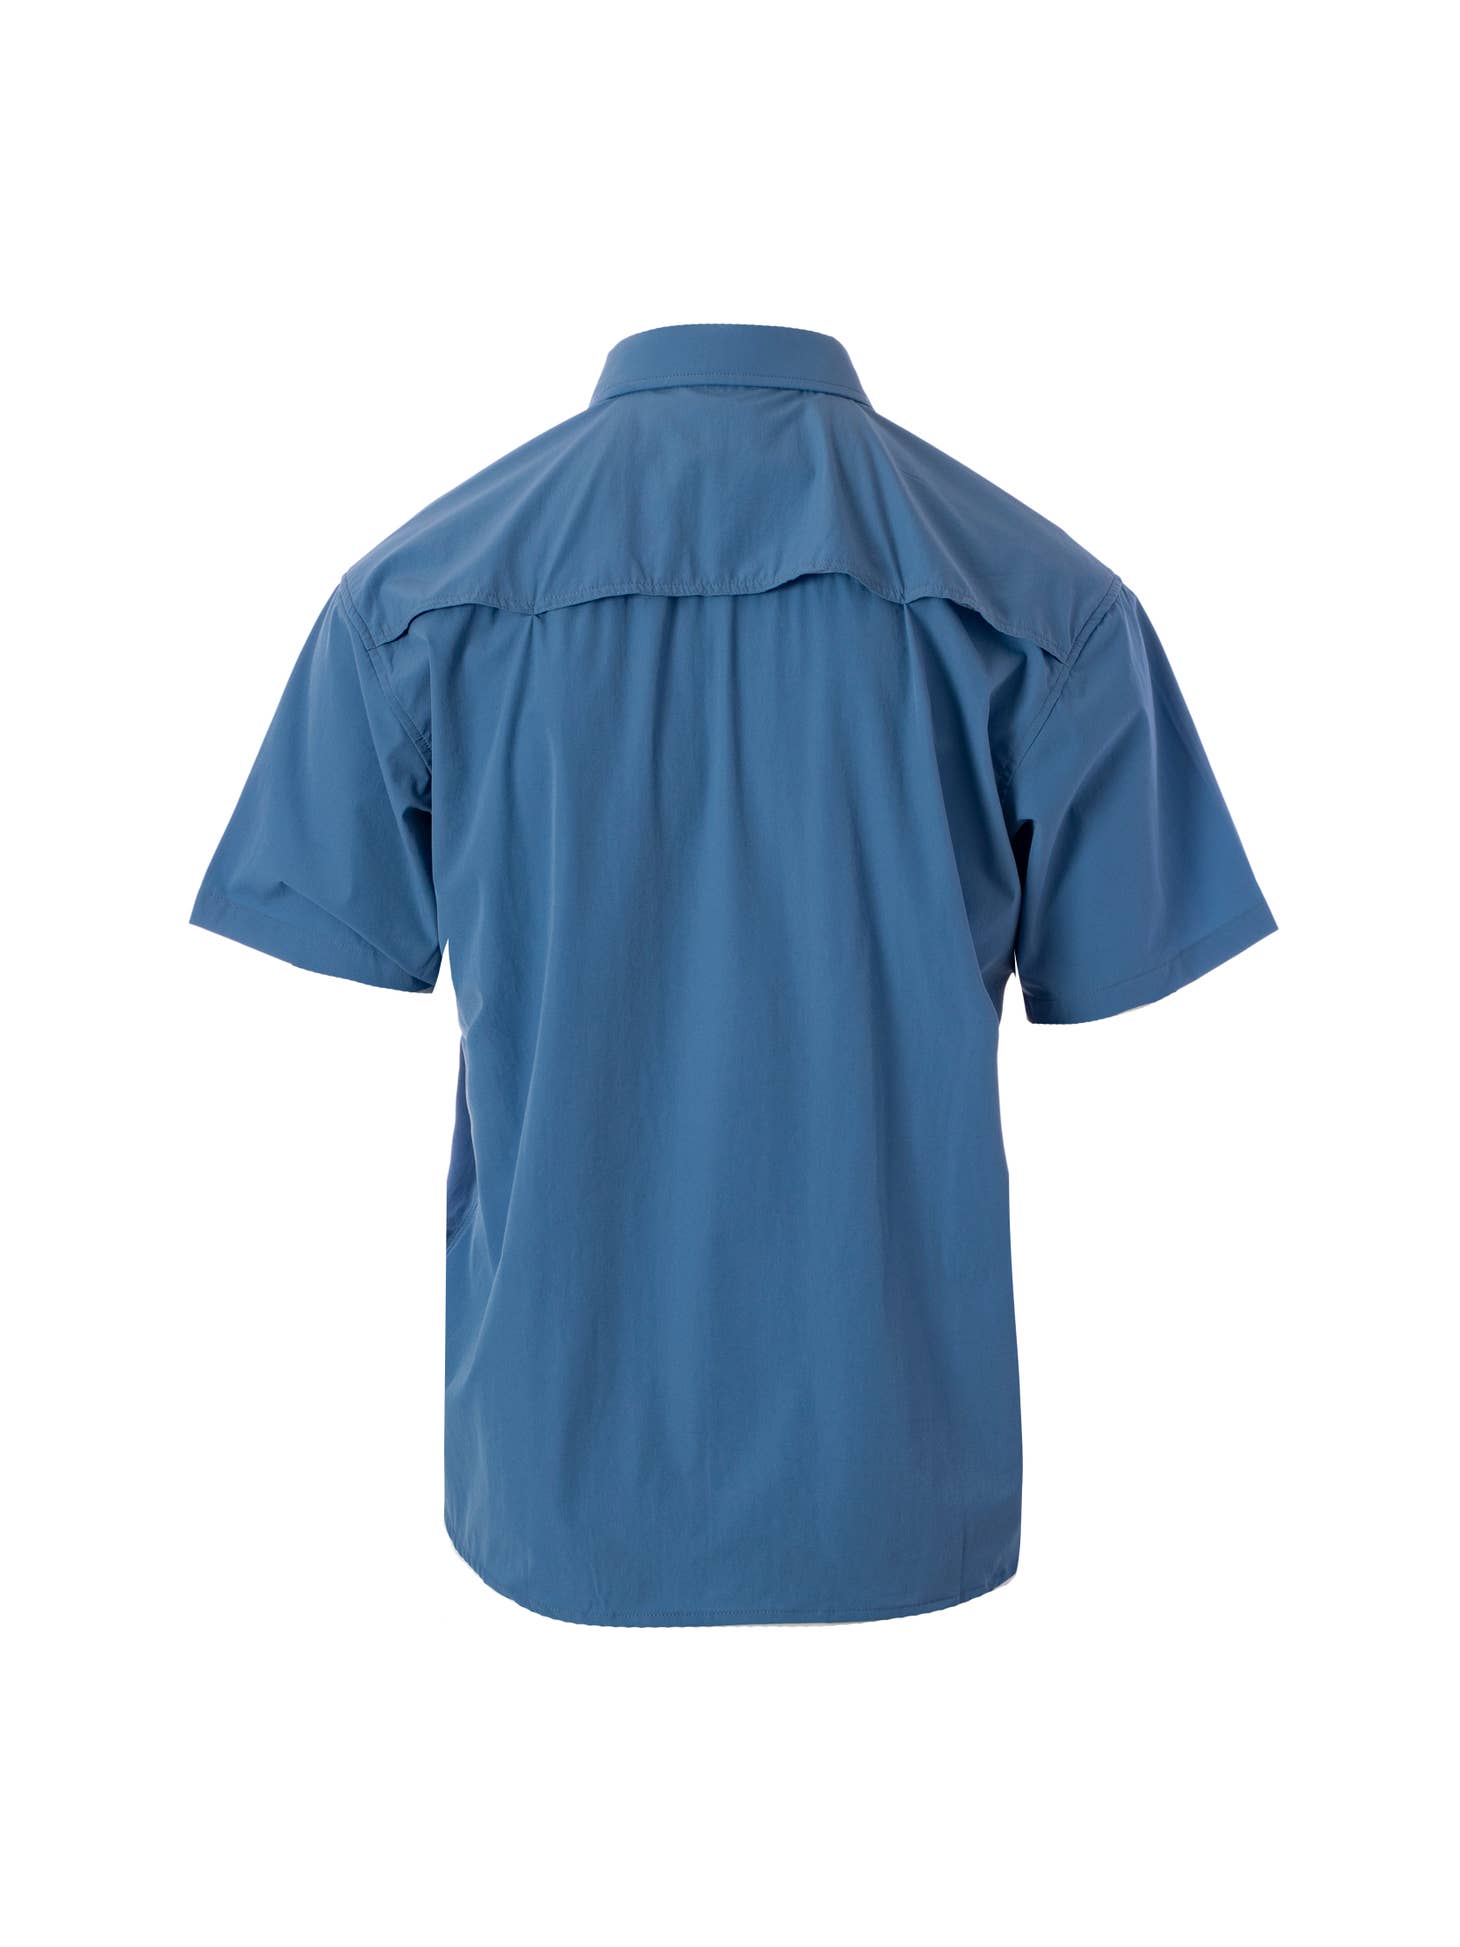 The Fieldstone Outdoor Provisions Co. Sportsman Button Down, a lightweight performance shirt for fishing trips, featuring a back view of a blue men's short sleeve shirt.